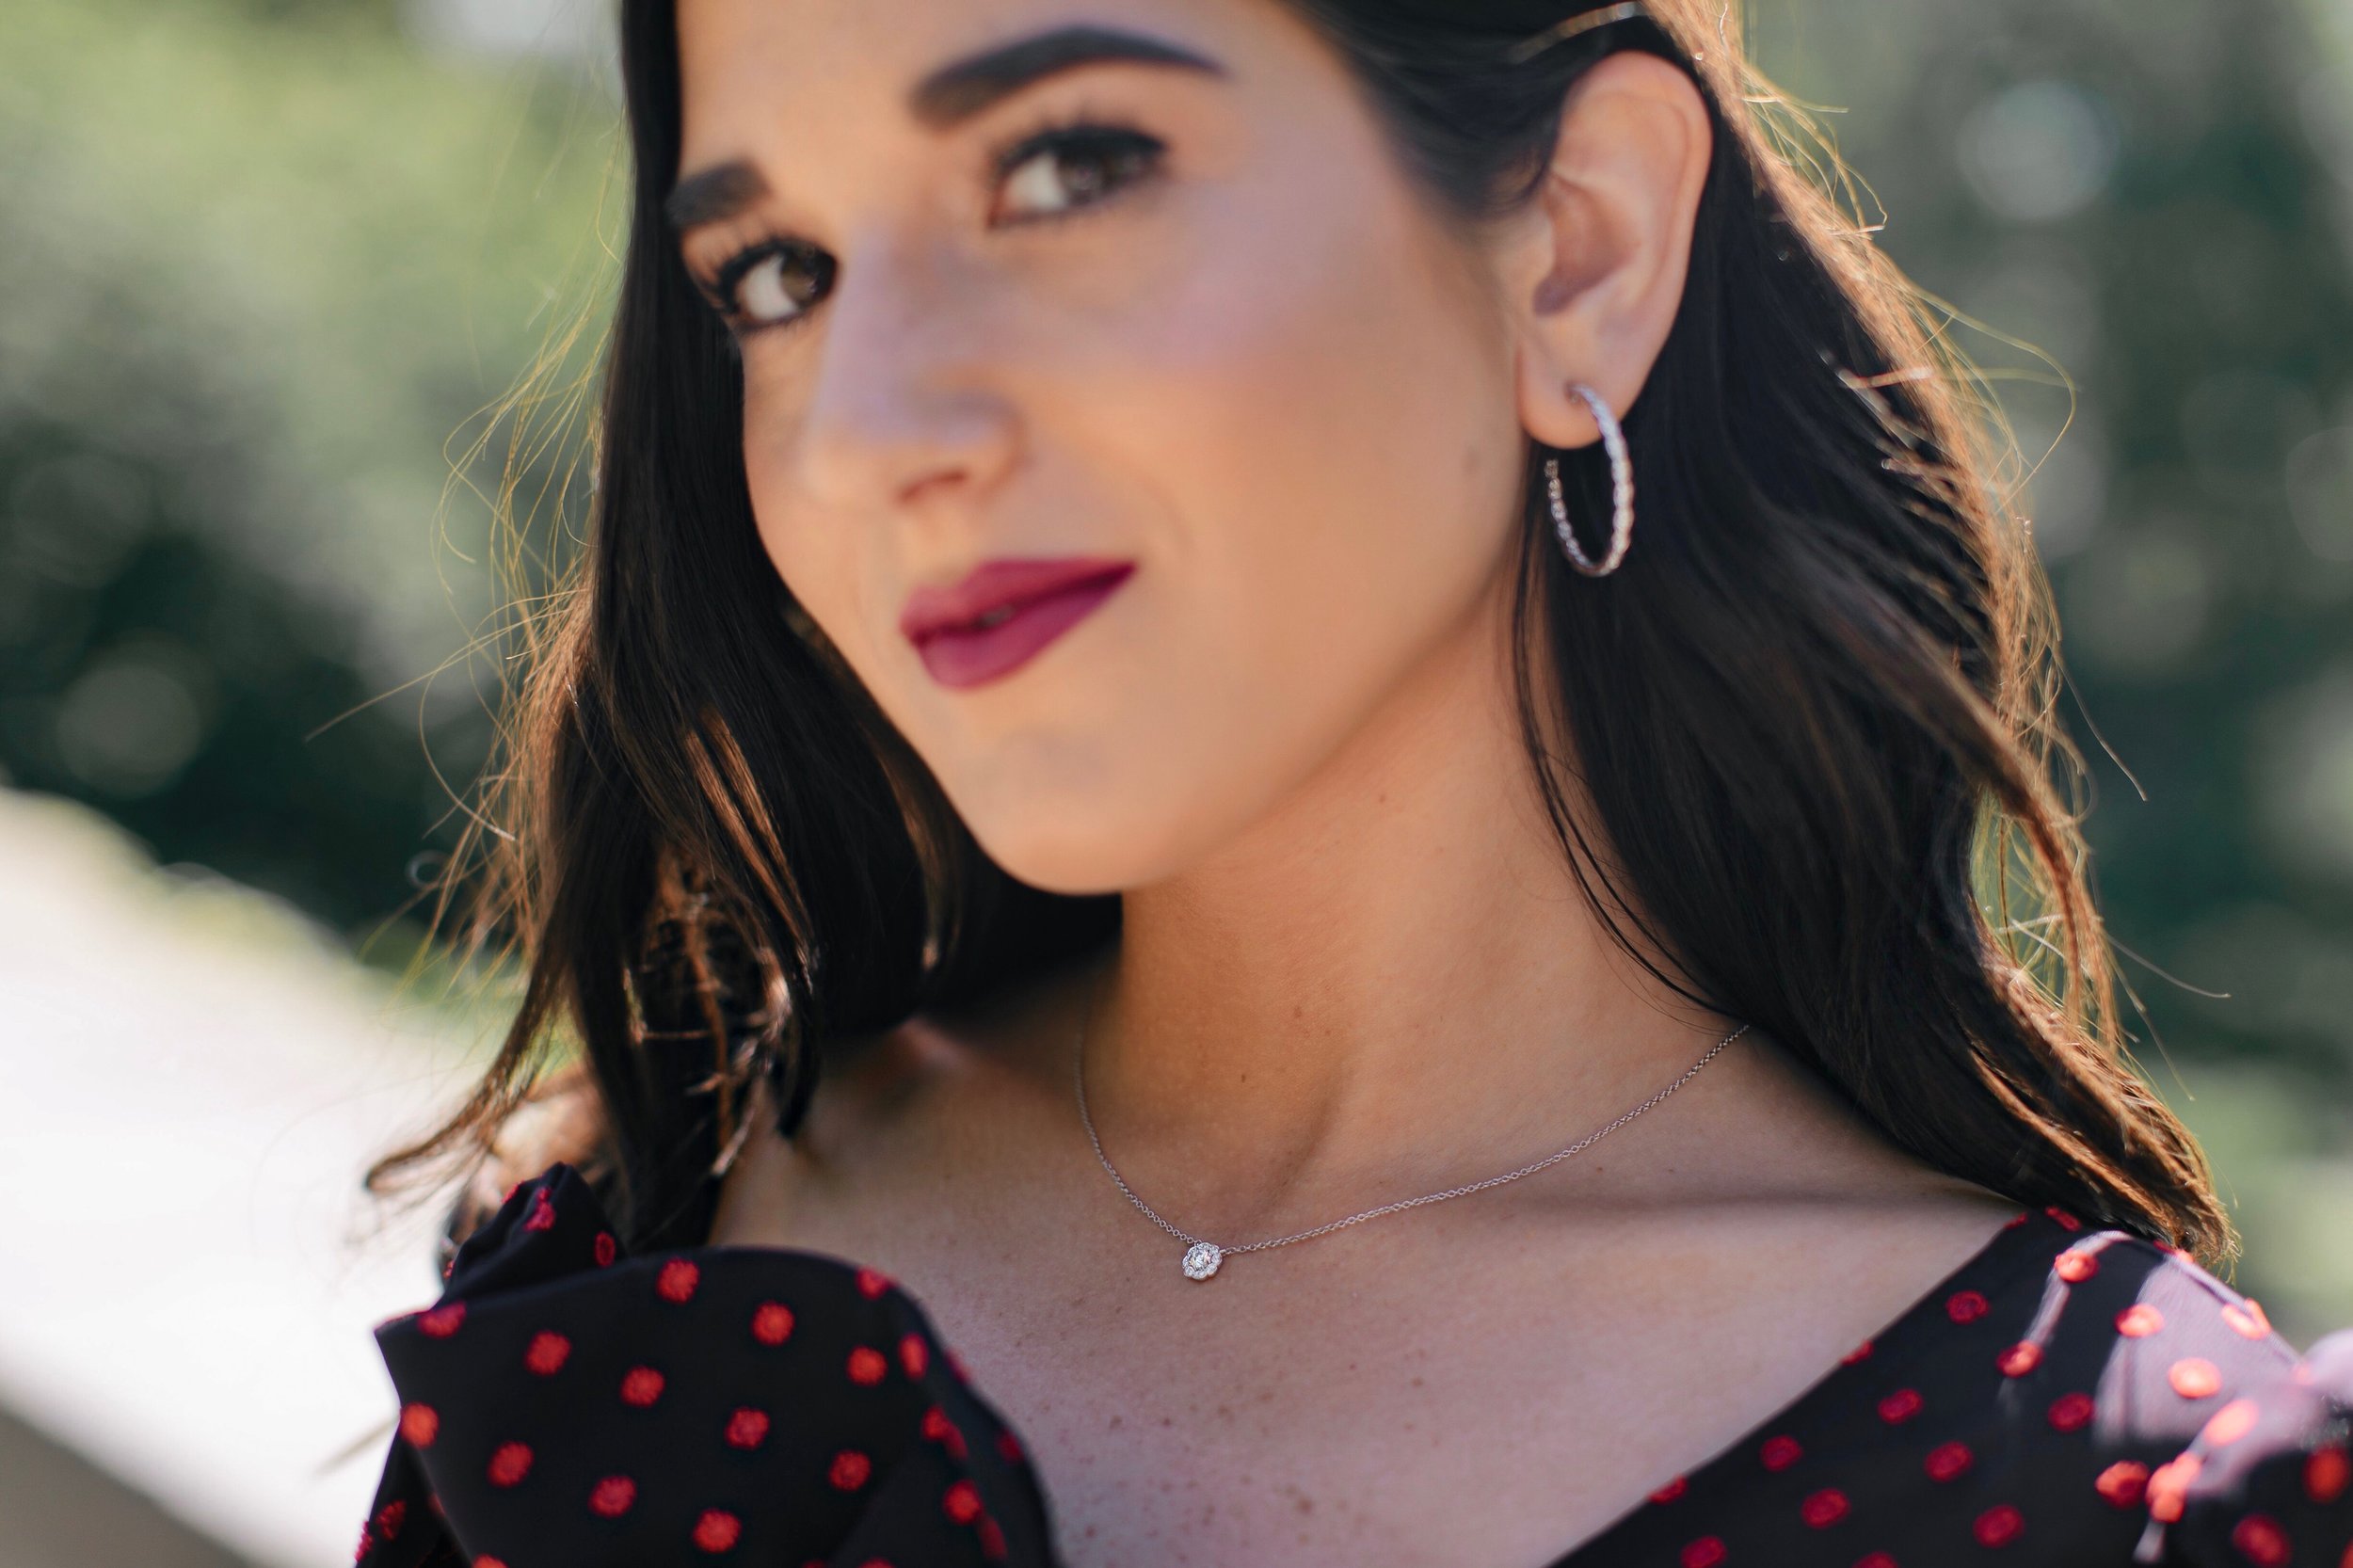 Decked Out In Diamonds Hearts On Fire Esther Santer NYC Street Style Blogger Outfit Self Portrait Necklace Ring Earrings Pretty Beautiful Perfect Cut Outfit Polka Dot Print Photoshoot Central Park New York City Lipstick Women Girl Wear Shopping Luxury.jpg